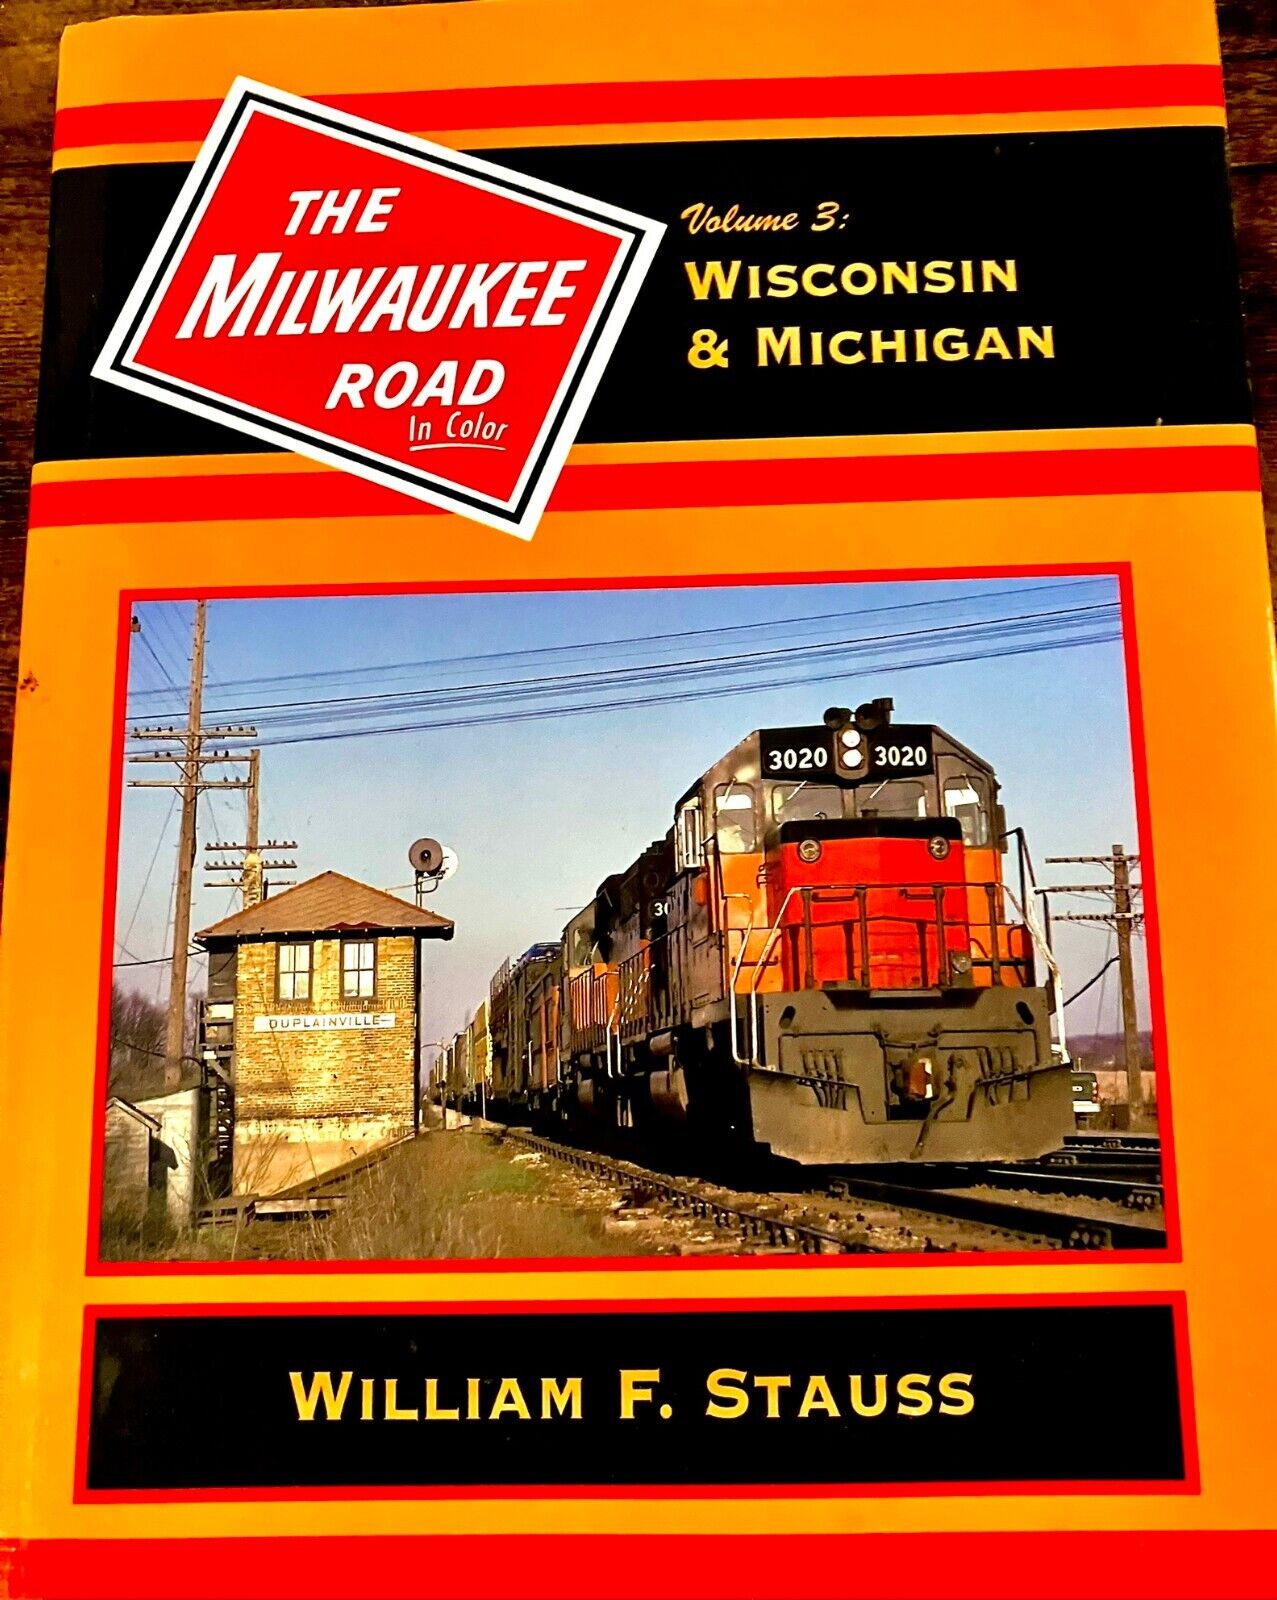 The Milwaukee Road In Color Vol. 3 by William Stauss - Very Good - Hardcover